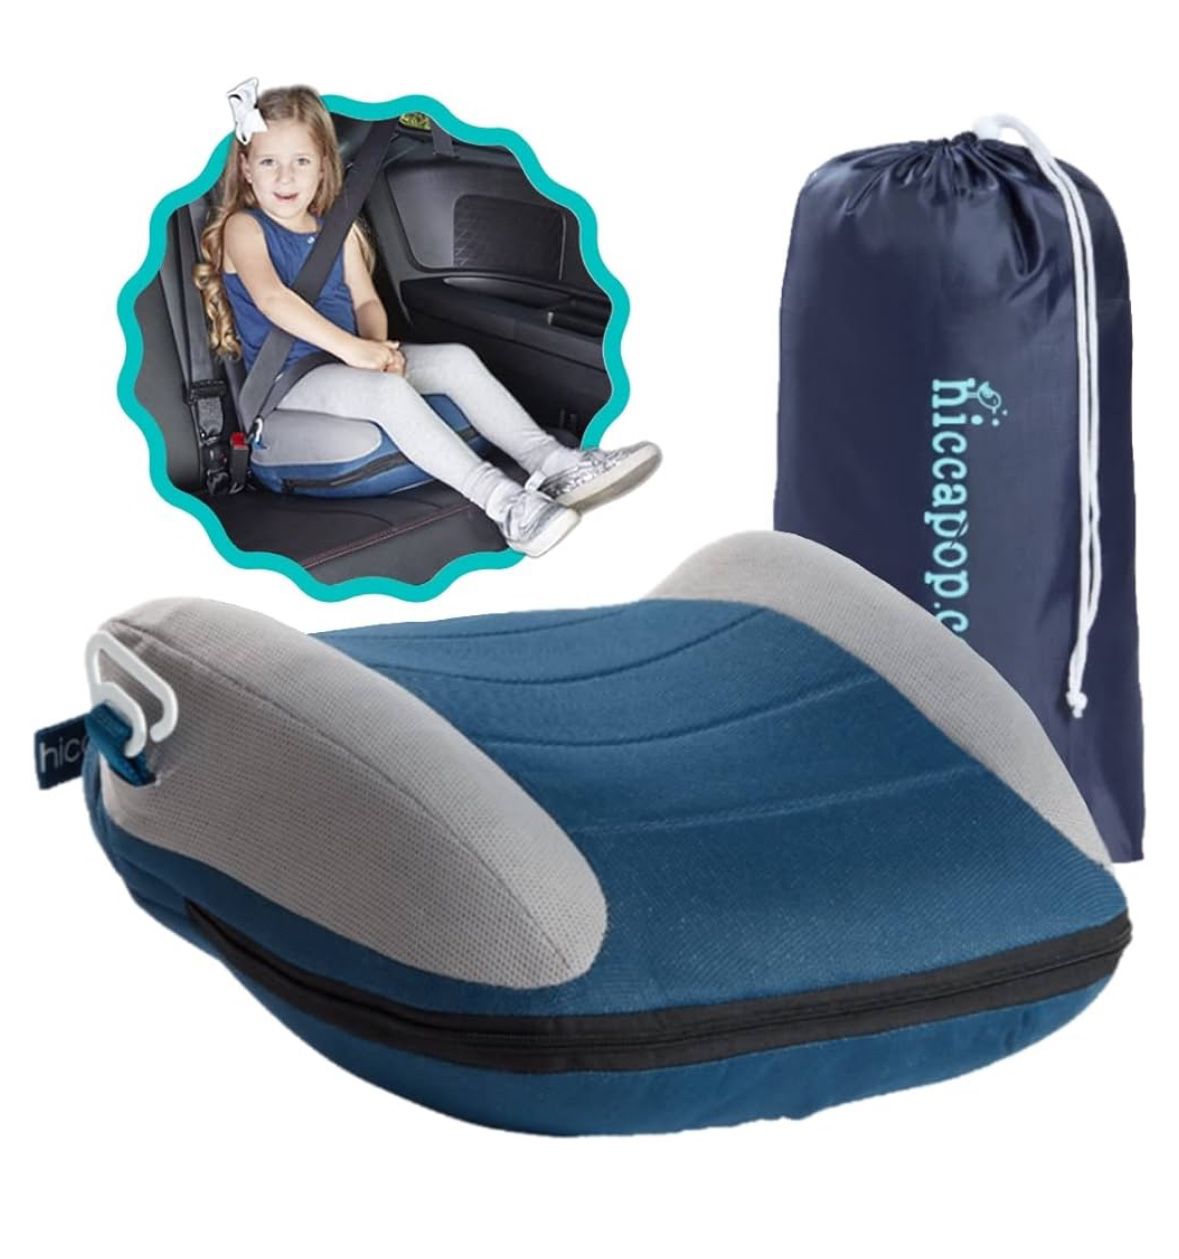 Hiccapop UberBoost Inflatable Booster Car Seat 